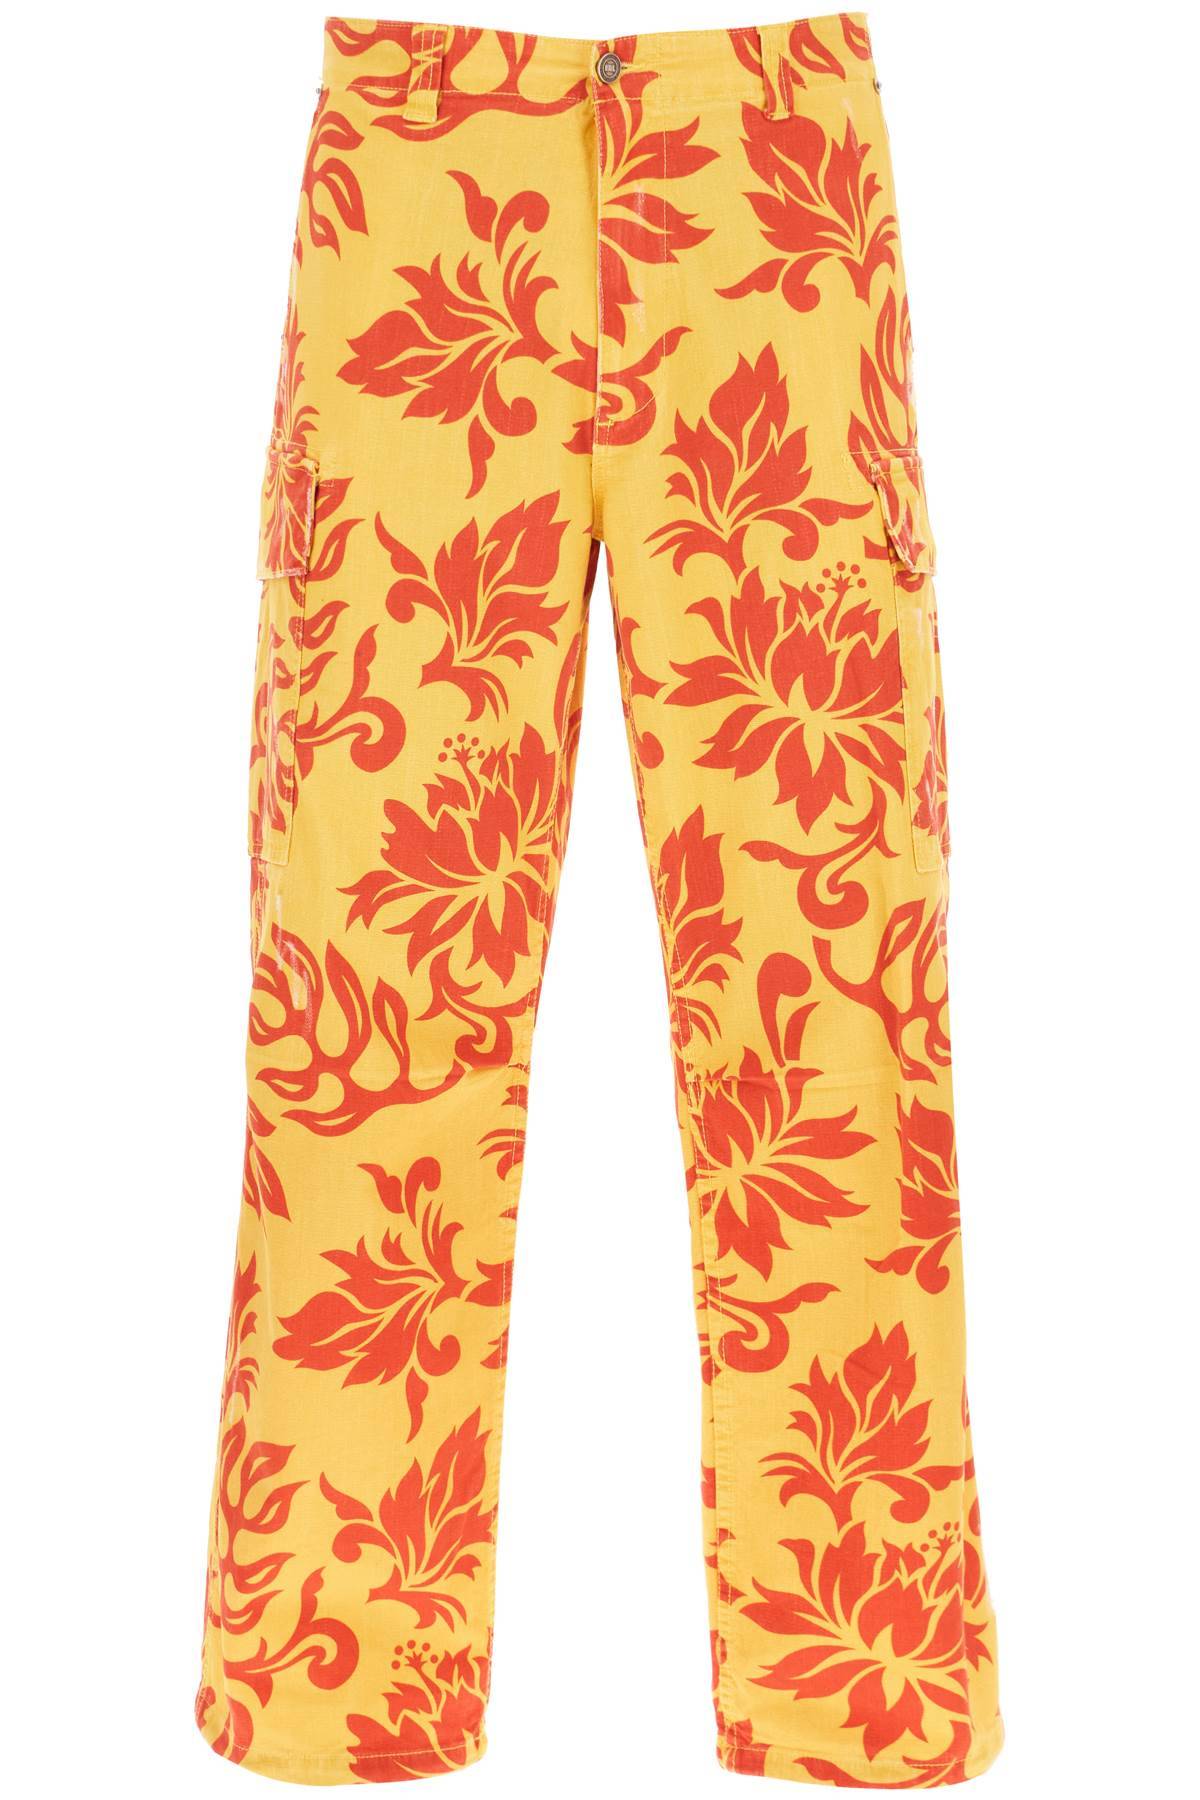 ERL ERL floral cargo pants